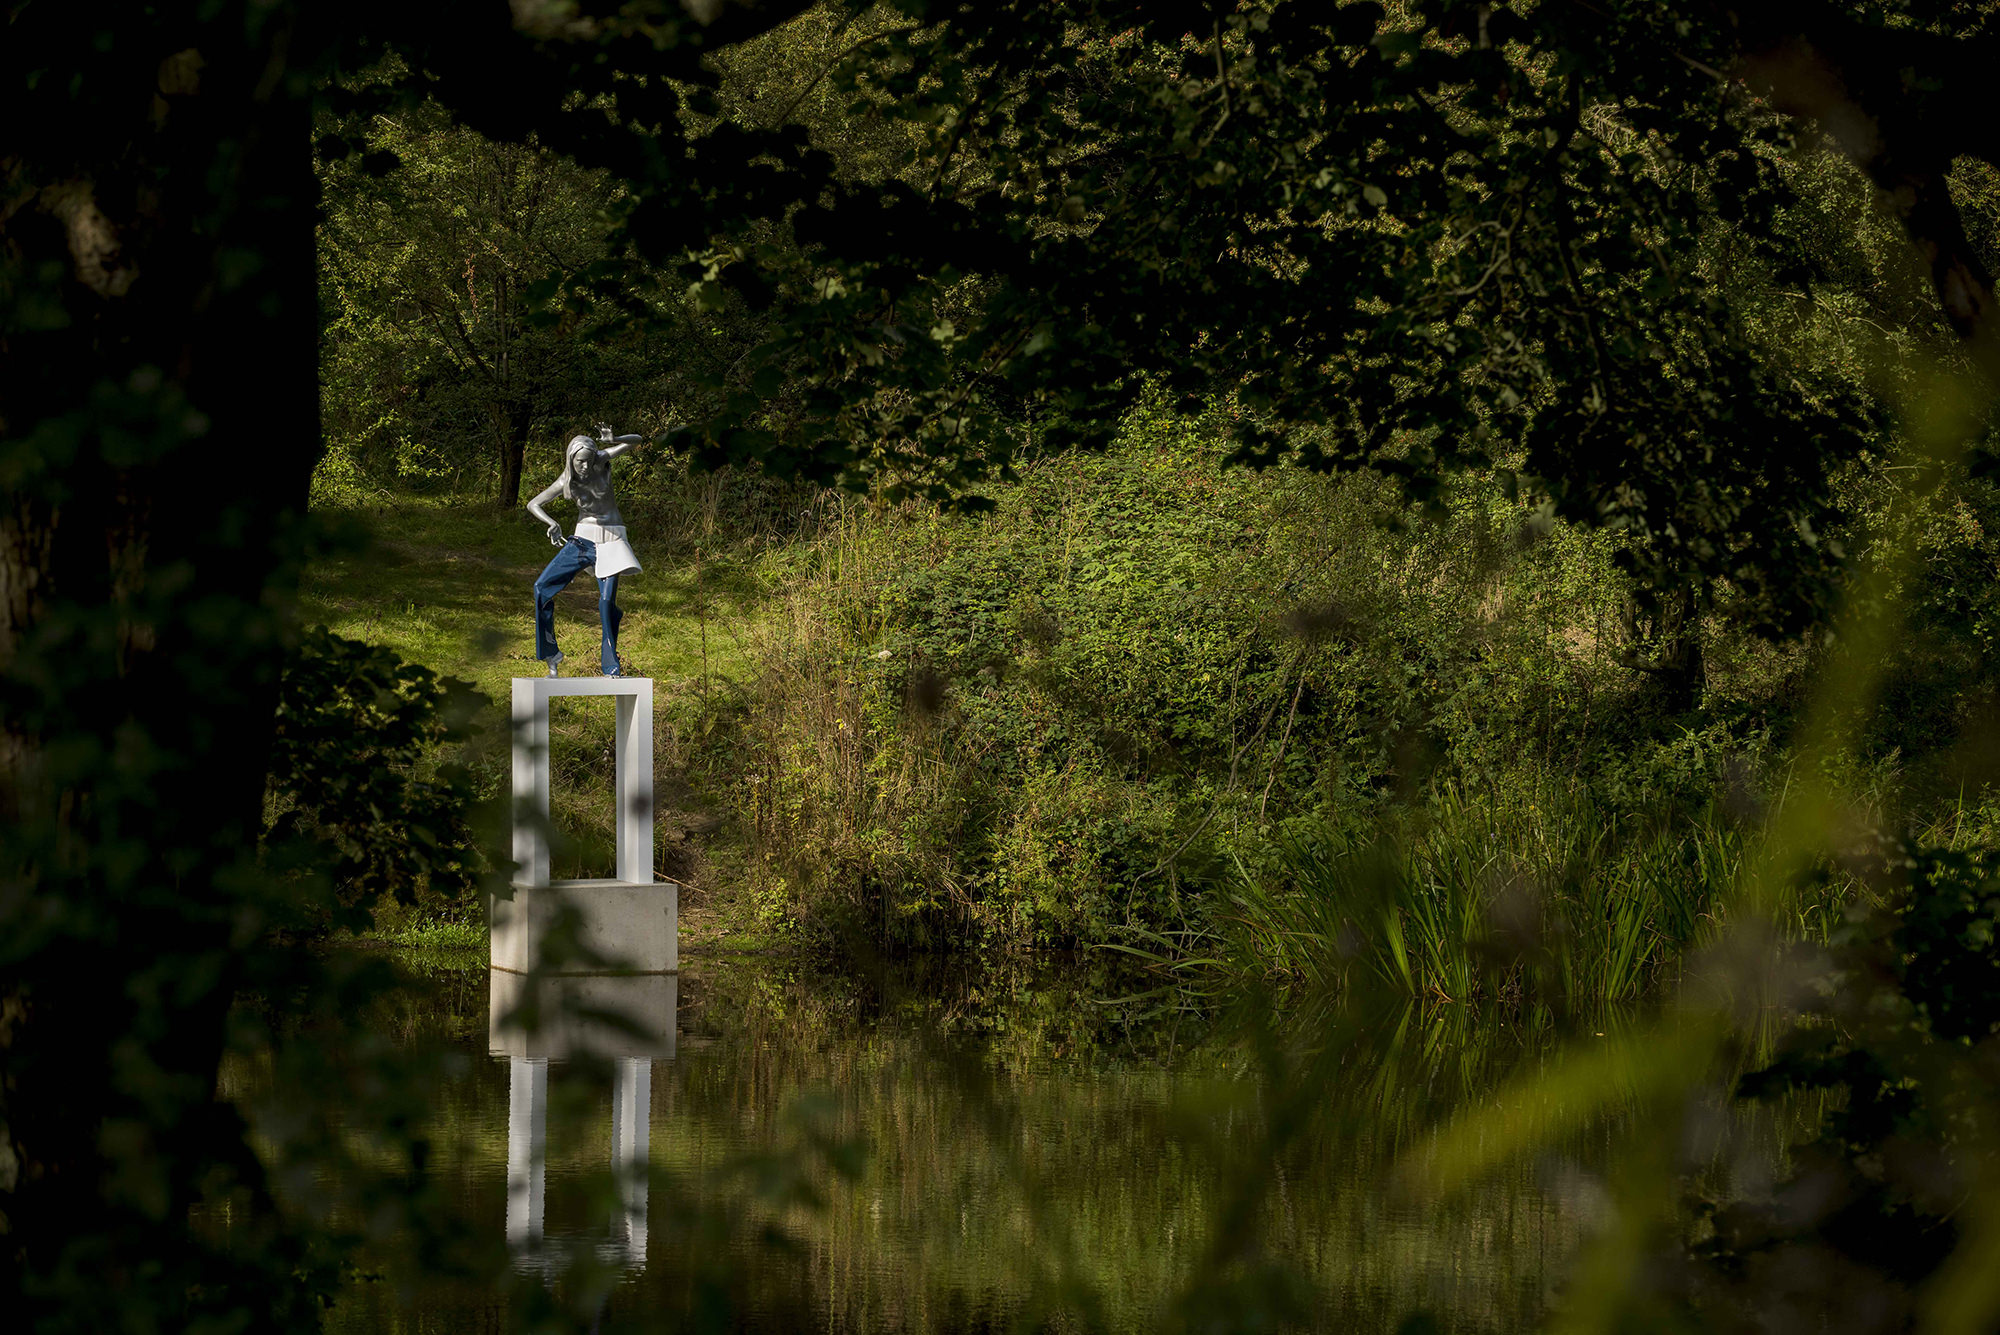 A female figure wearing jeans standing on a white plinth at the edge of a lake, surrounded by foliage